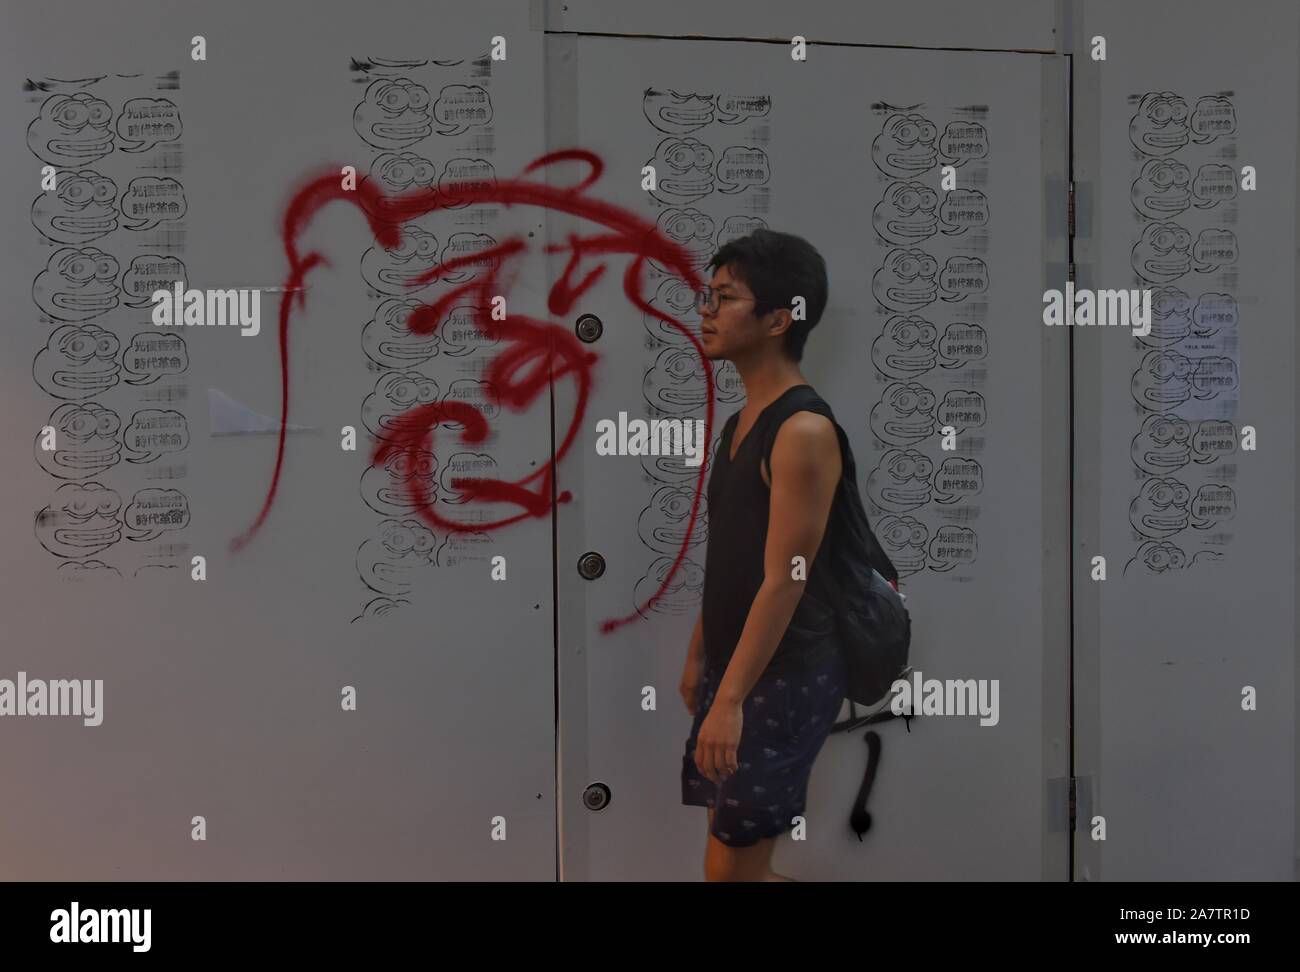 A man walks past a graffiti during the protest.The pro-democracy movement was originated with the outcry against the extradition bill. Hong Kong has entered 22nd week continued mass protests. Stock Photo